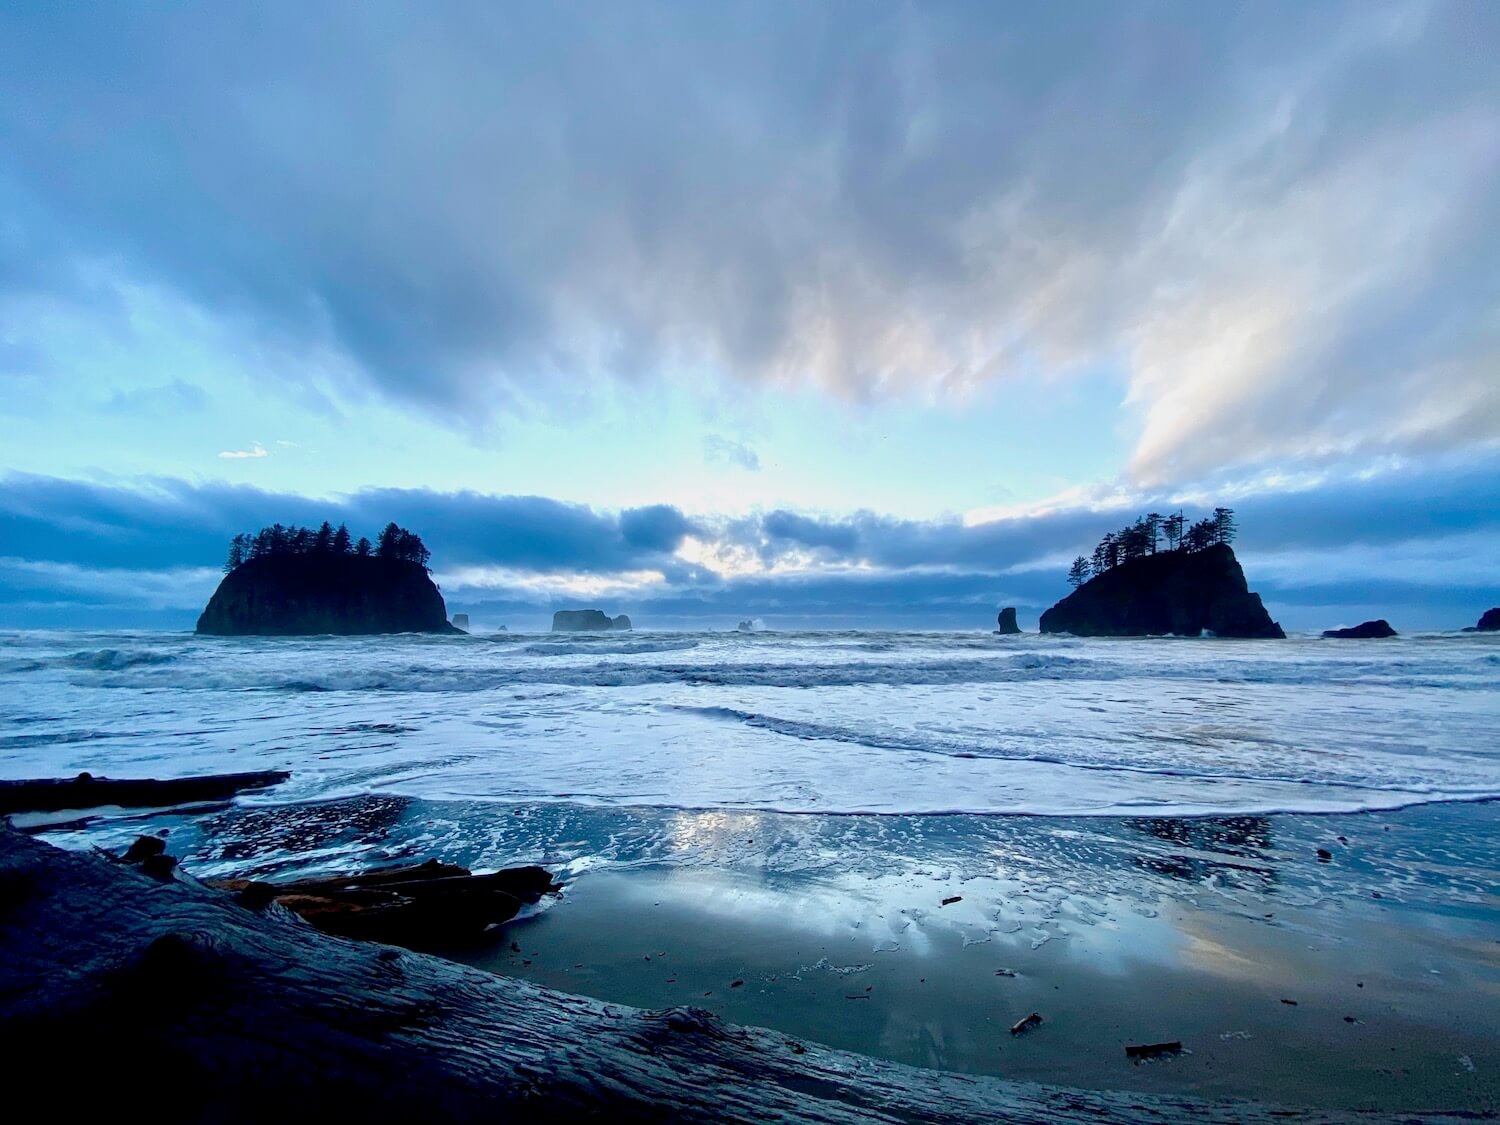 A beach scene of the Pacific Ocean waves crashing on the fine sandy beach with two large rocky islands in the background with fir trees growing on top.  The coastline is a fun place to explore on the Olympic Peninsula.